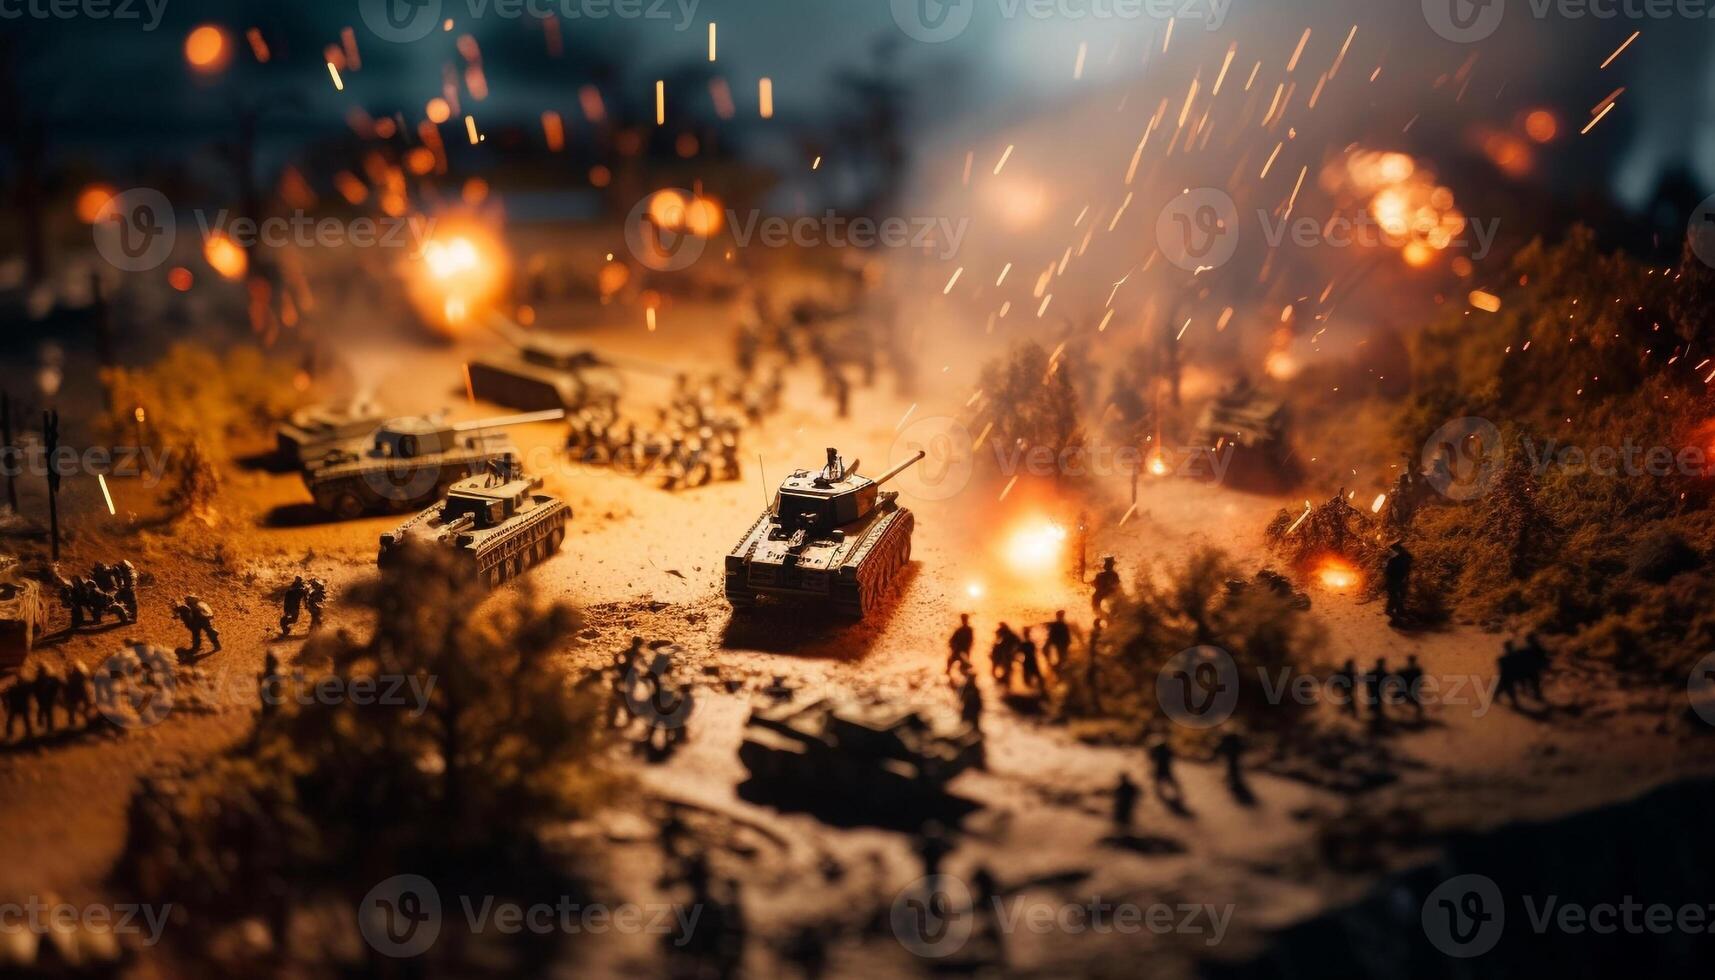 Armed forces battle in the fiery dusk generated by AI photo